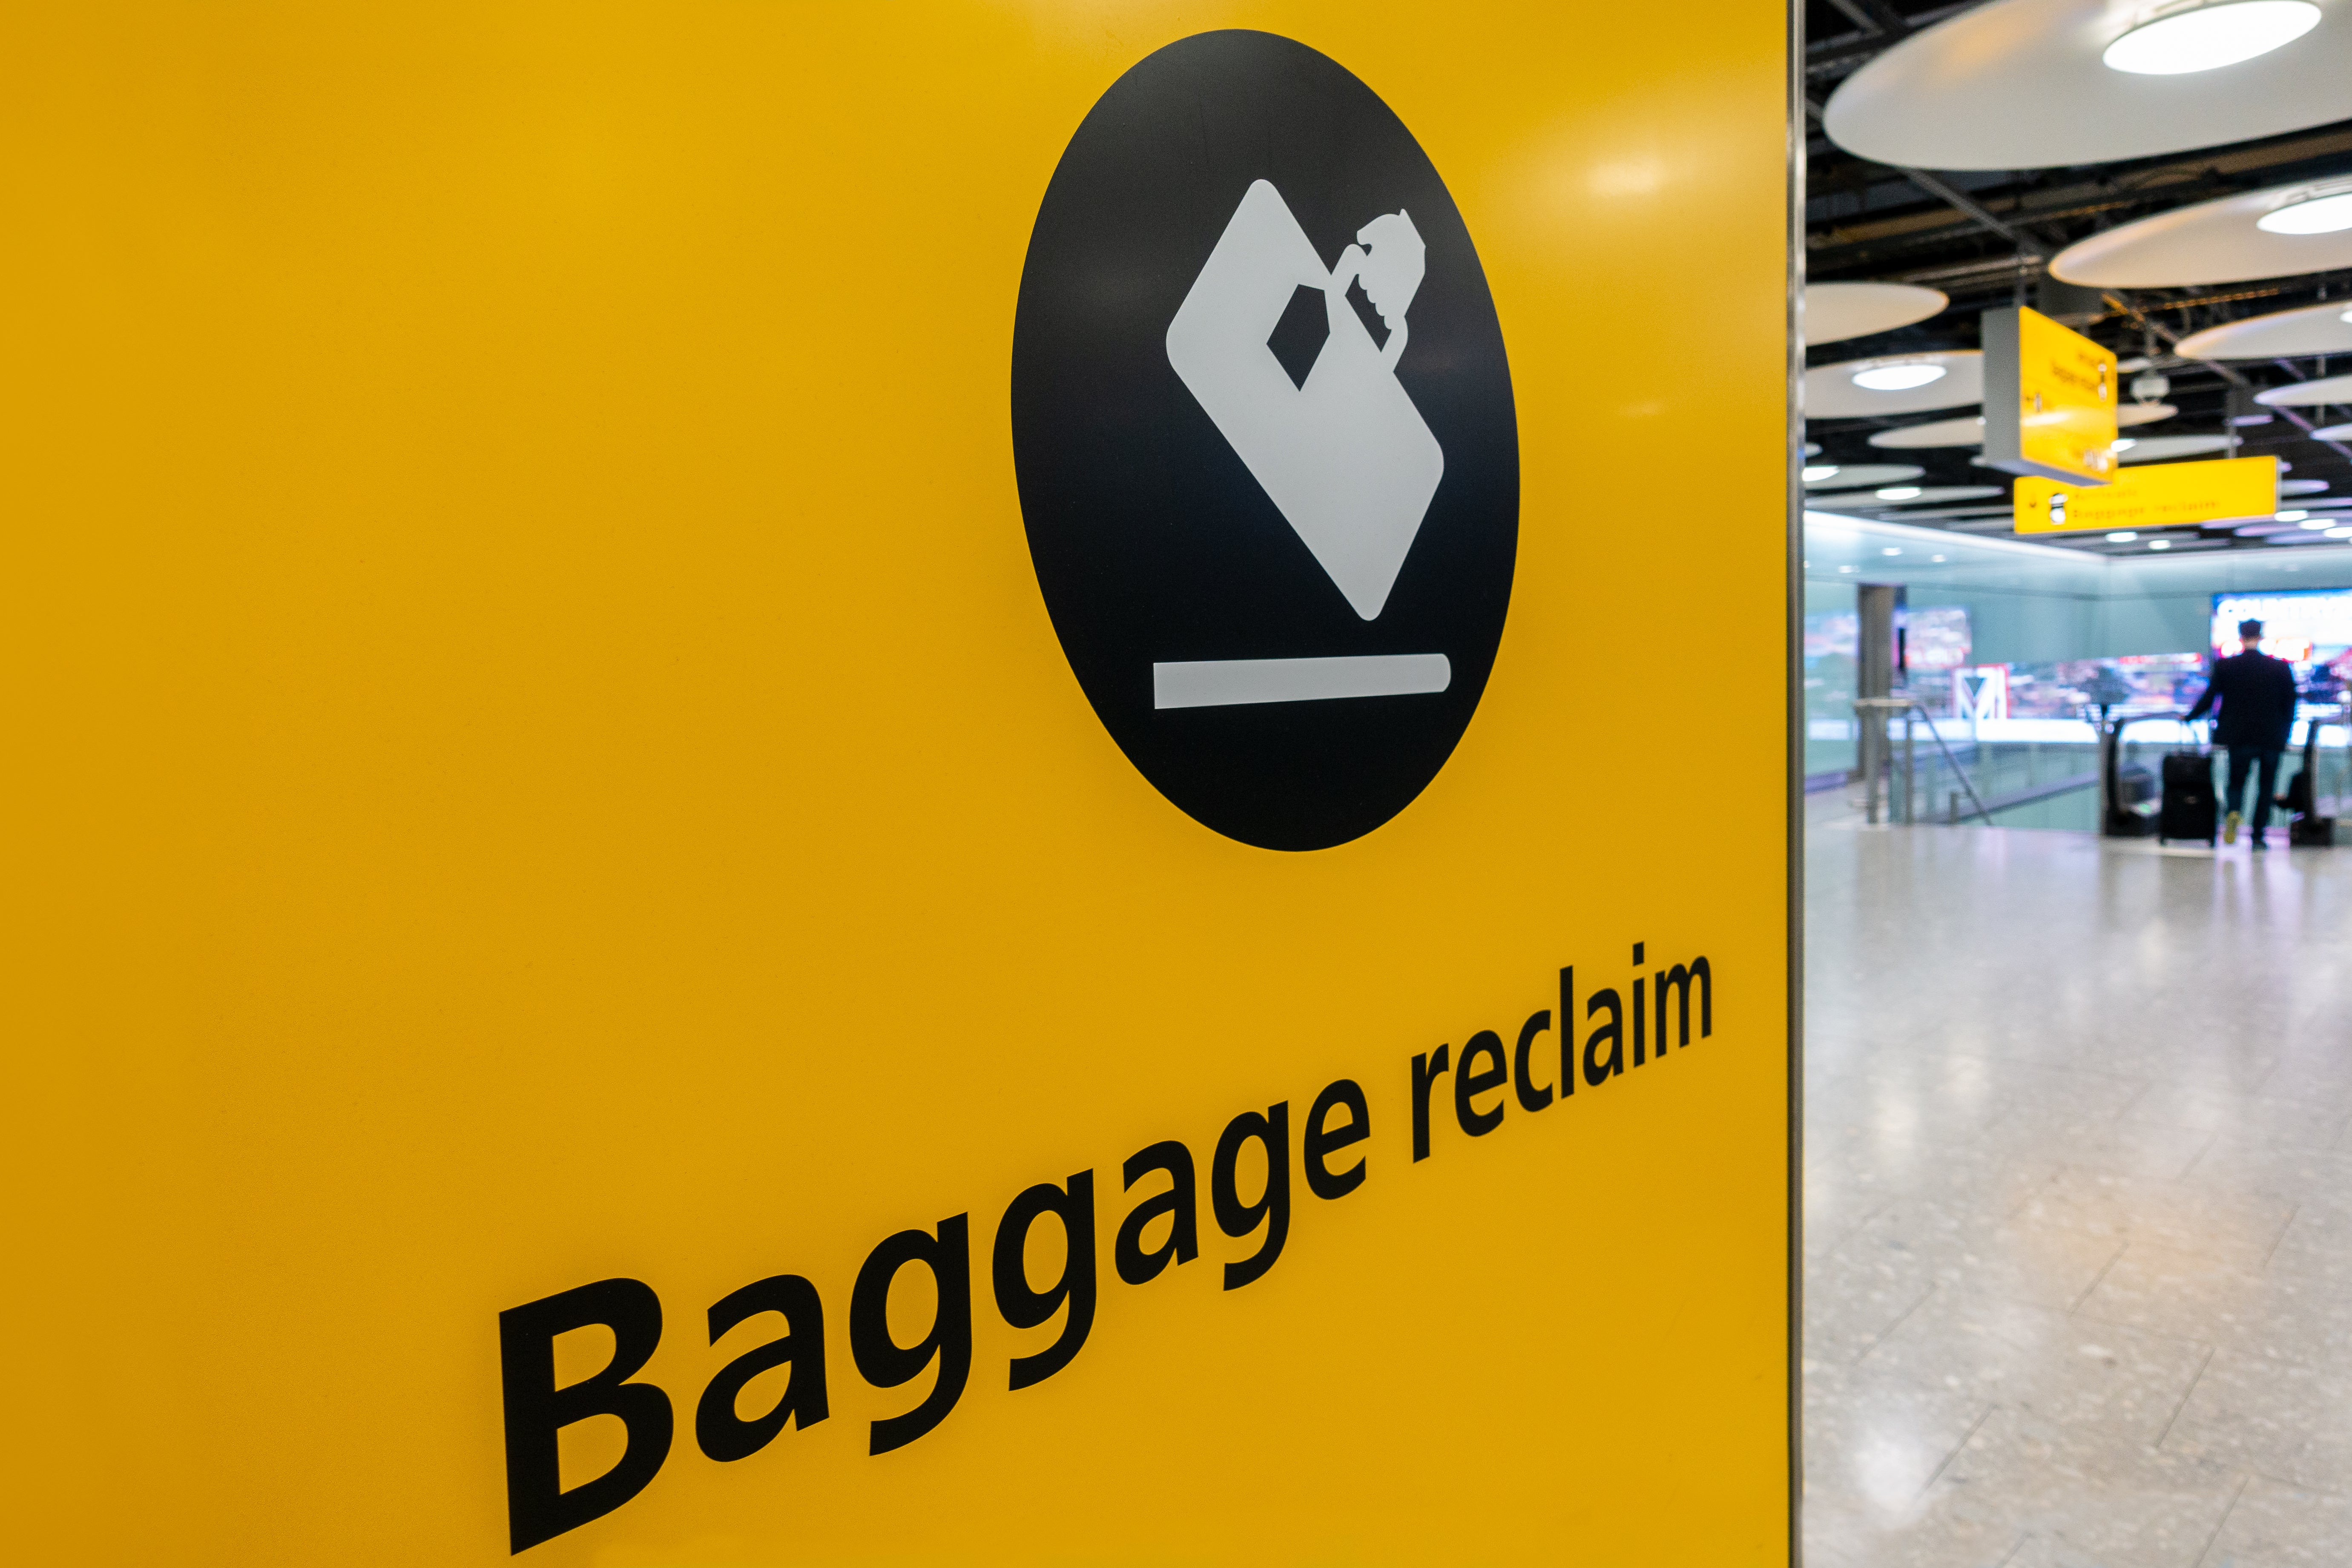 <p>‘Baggage is the responsibility of the airline’, the airport has said</p>